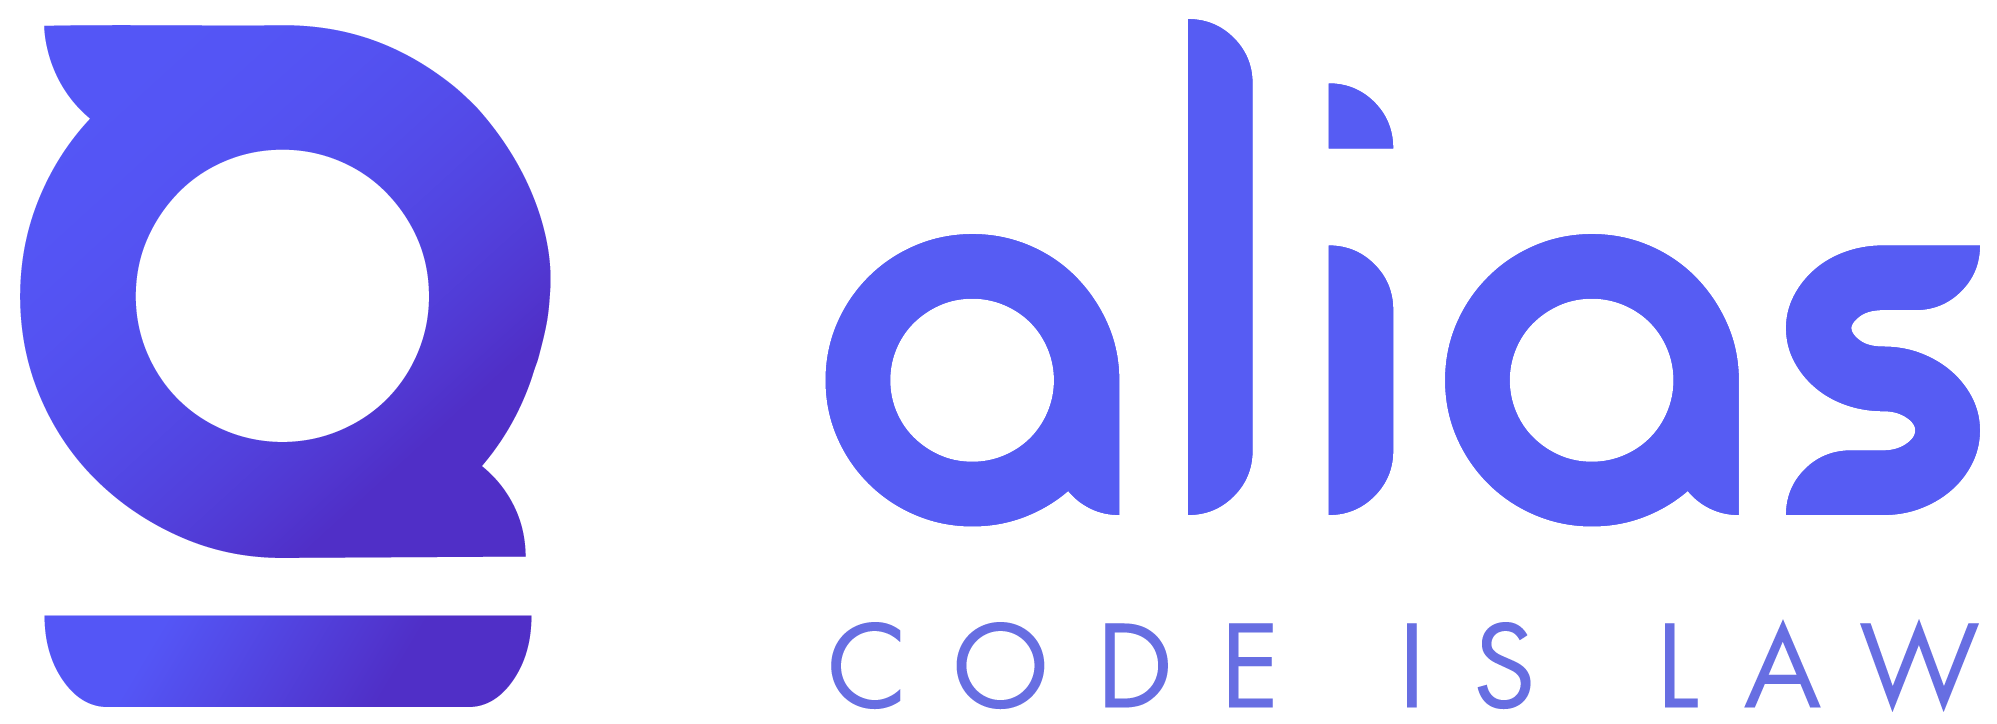 Code is law